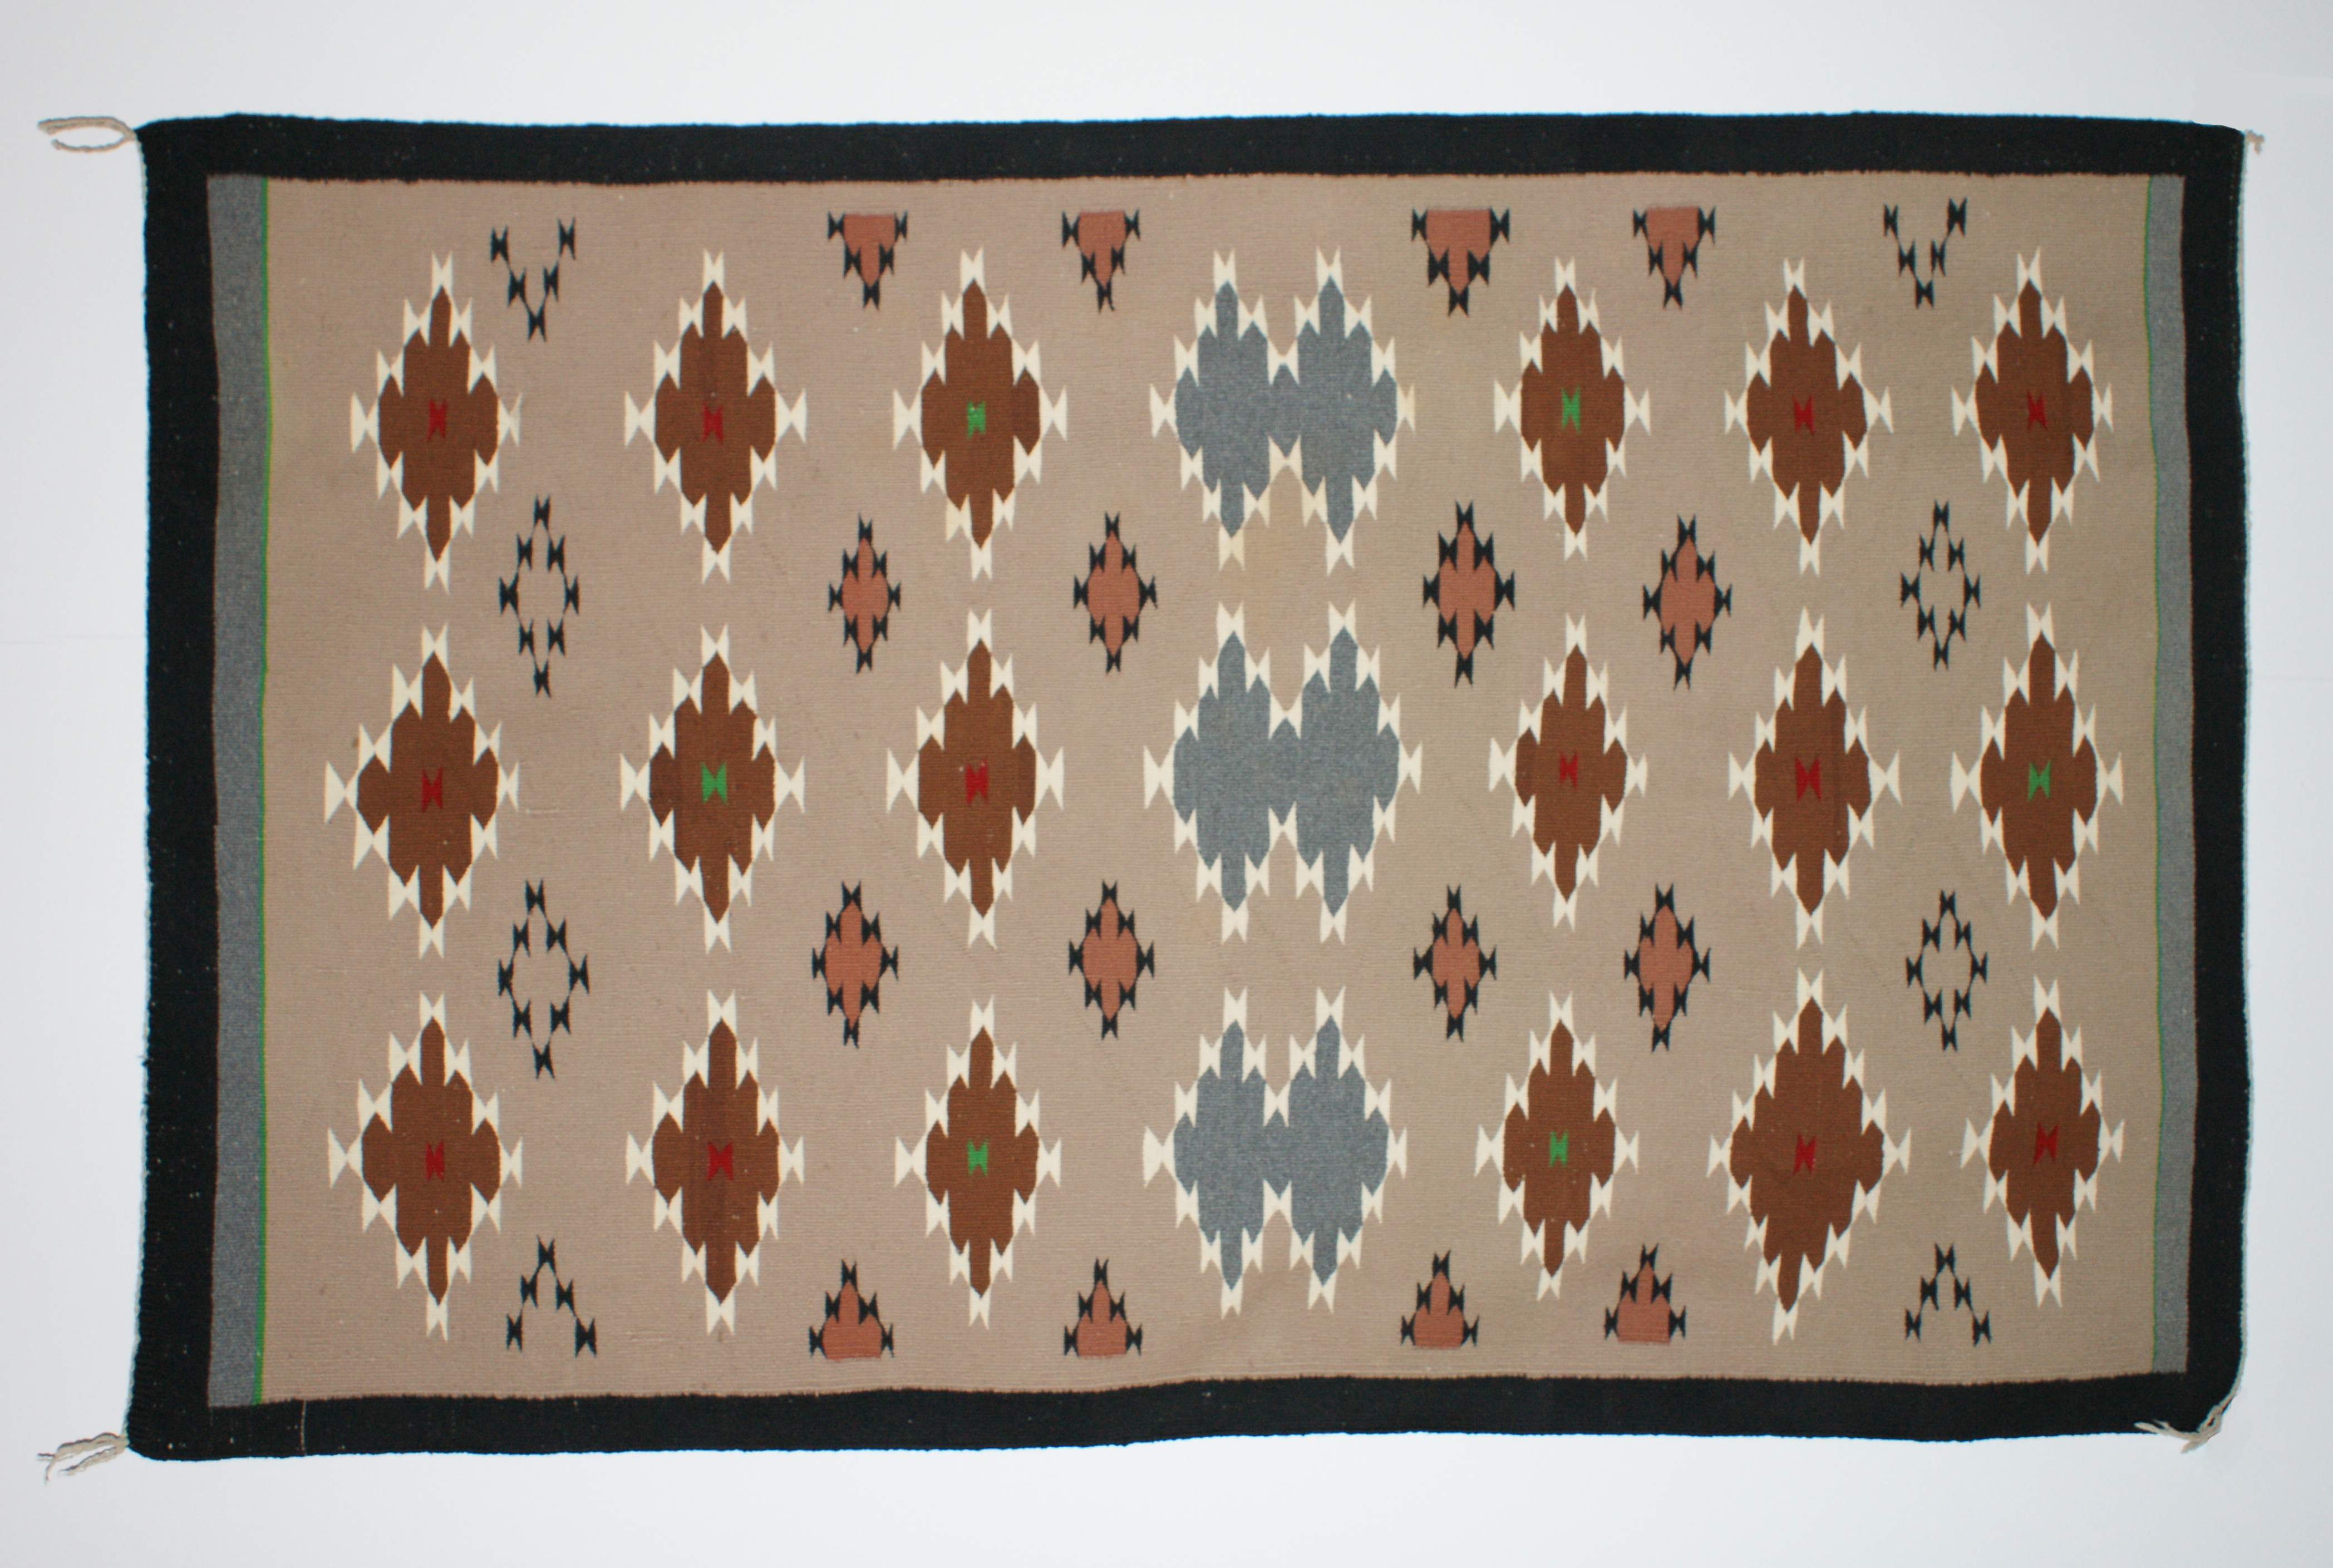 Image of woven rug, with multicolored diamond designs.